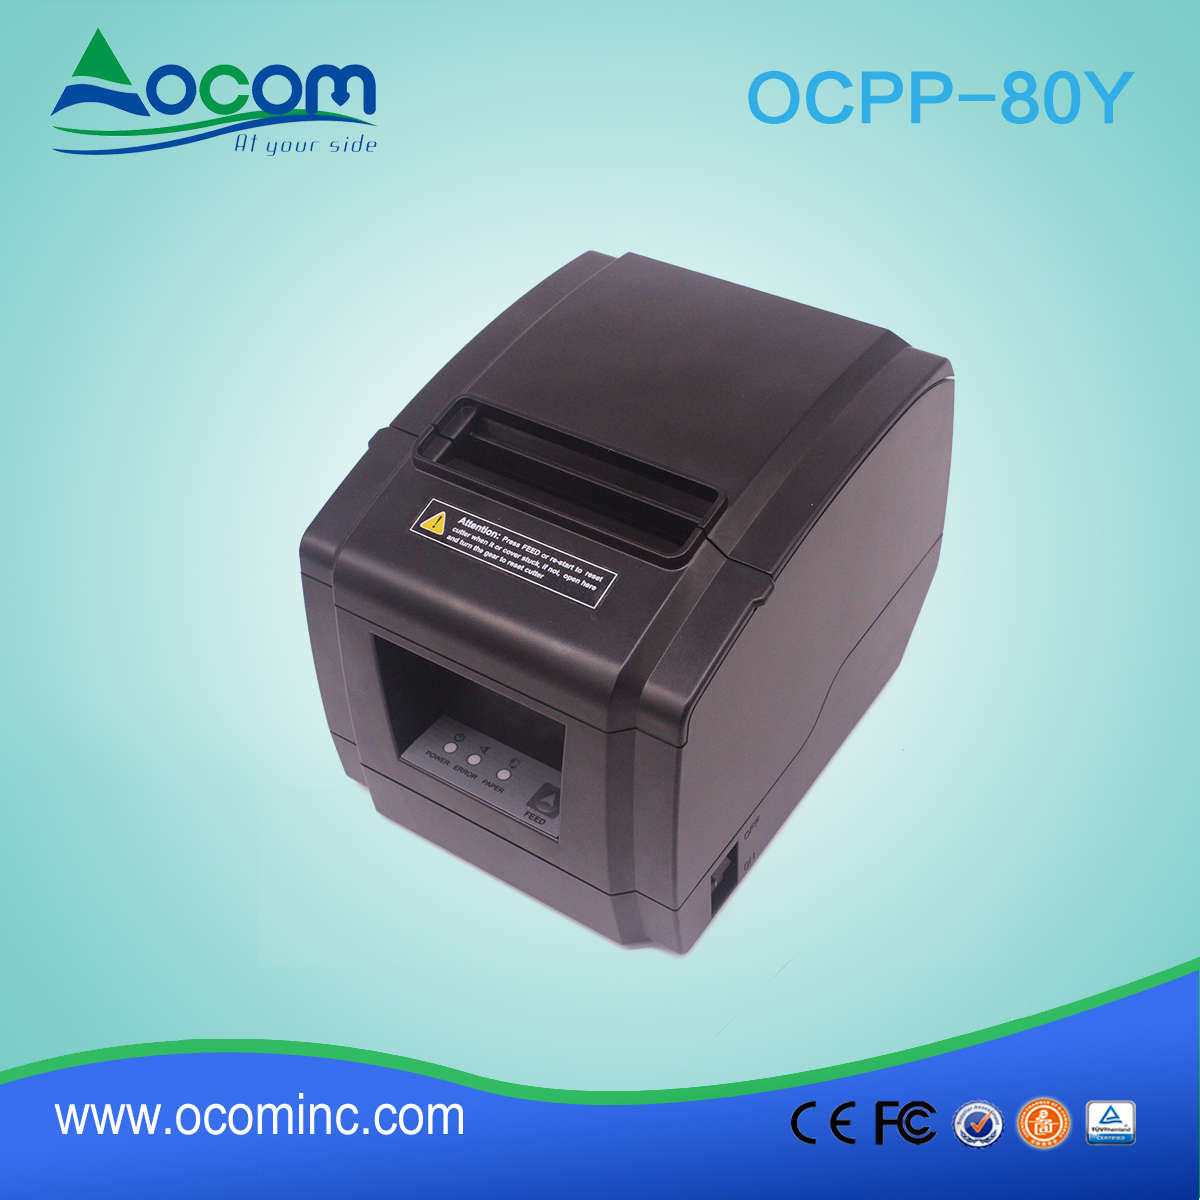 (OCPP-80Y) New Model 80mm thermal Receipt Printer with Auto Cutter